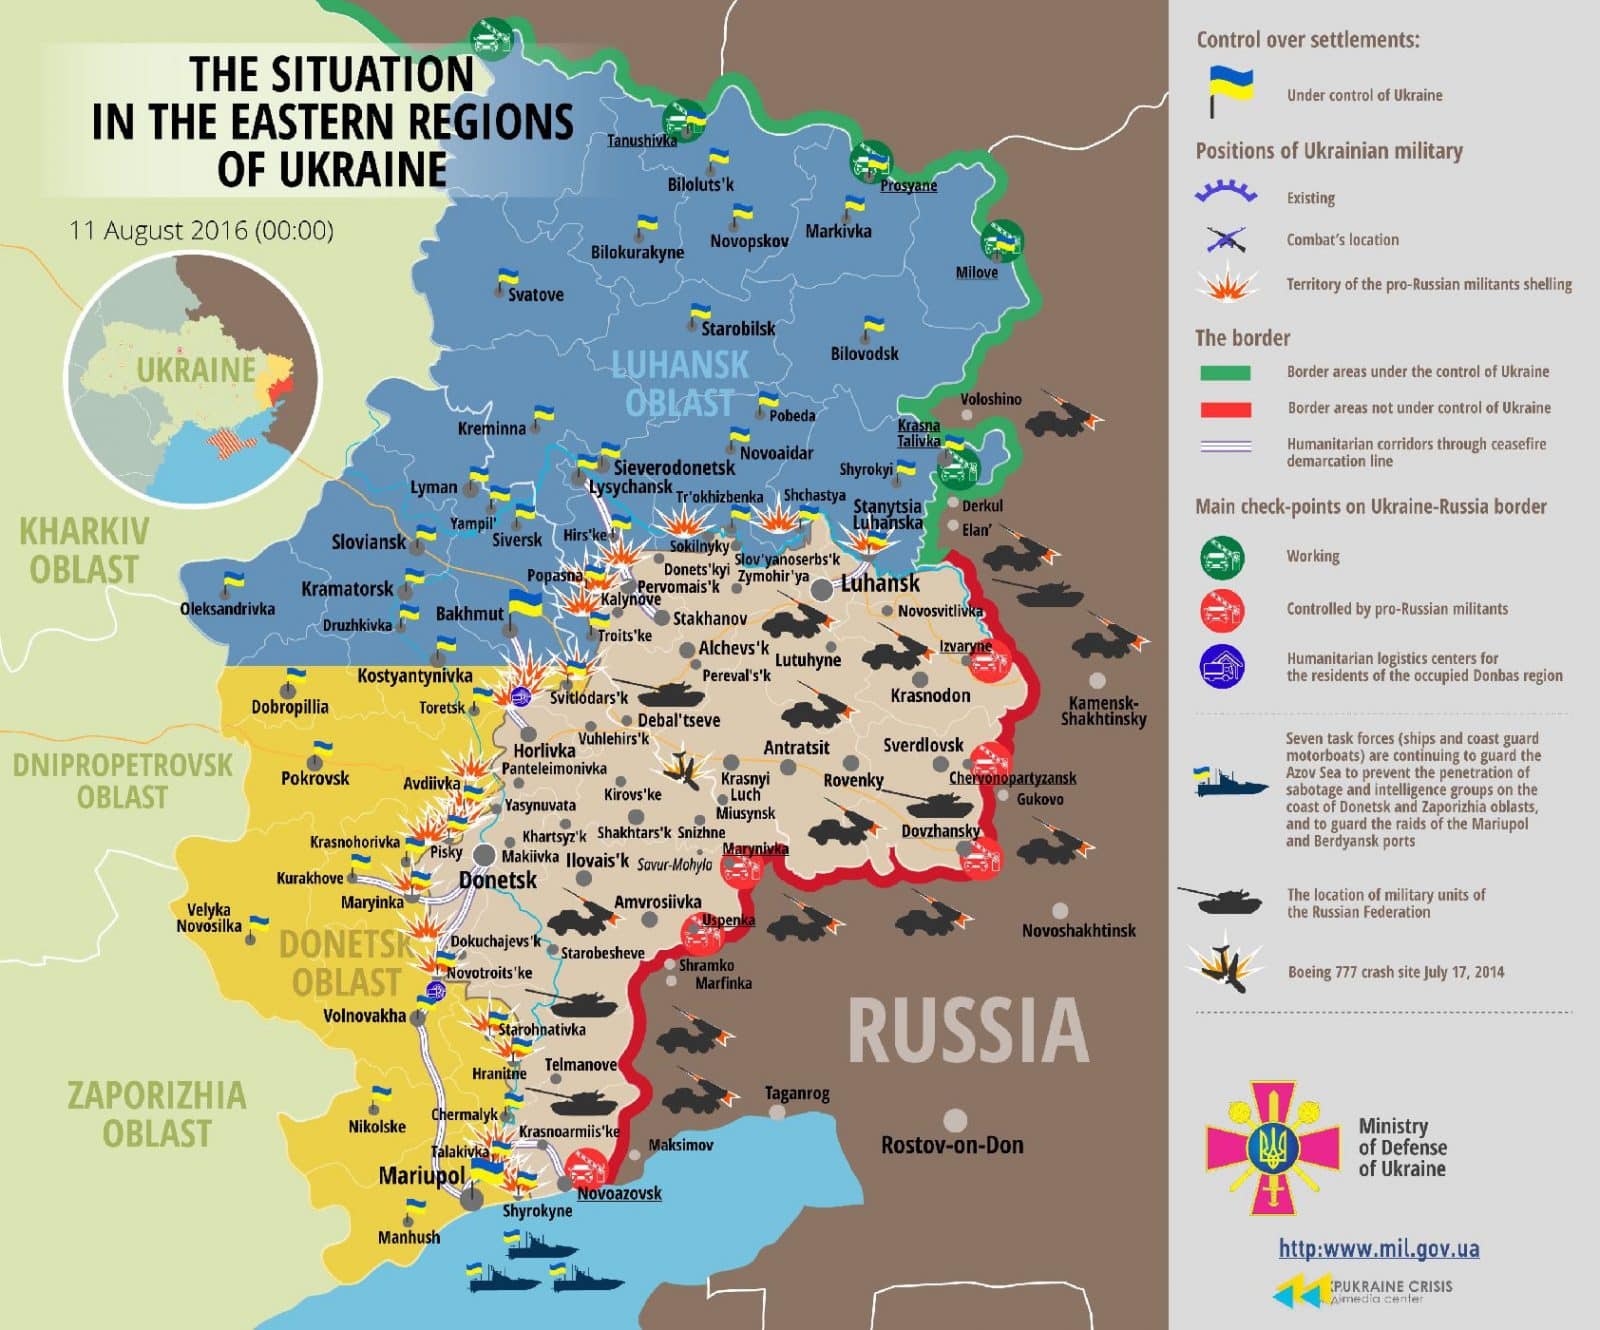 Russian troops attack Ukraine 42 times in last day, use banned arms near Mariupol